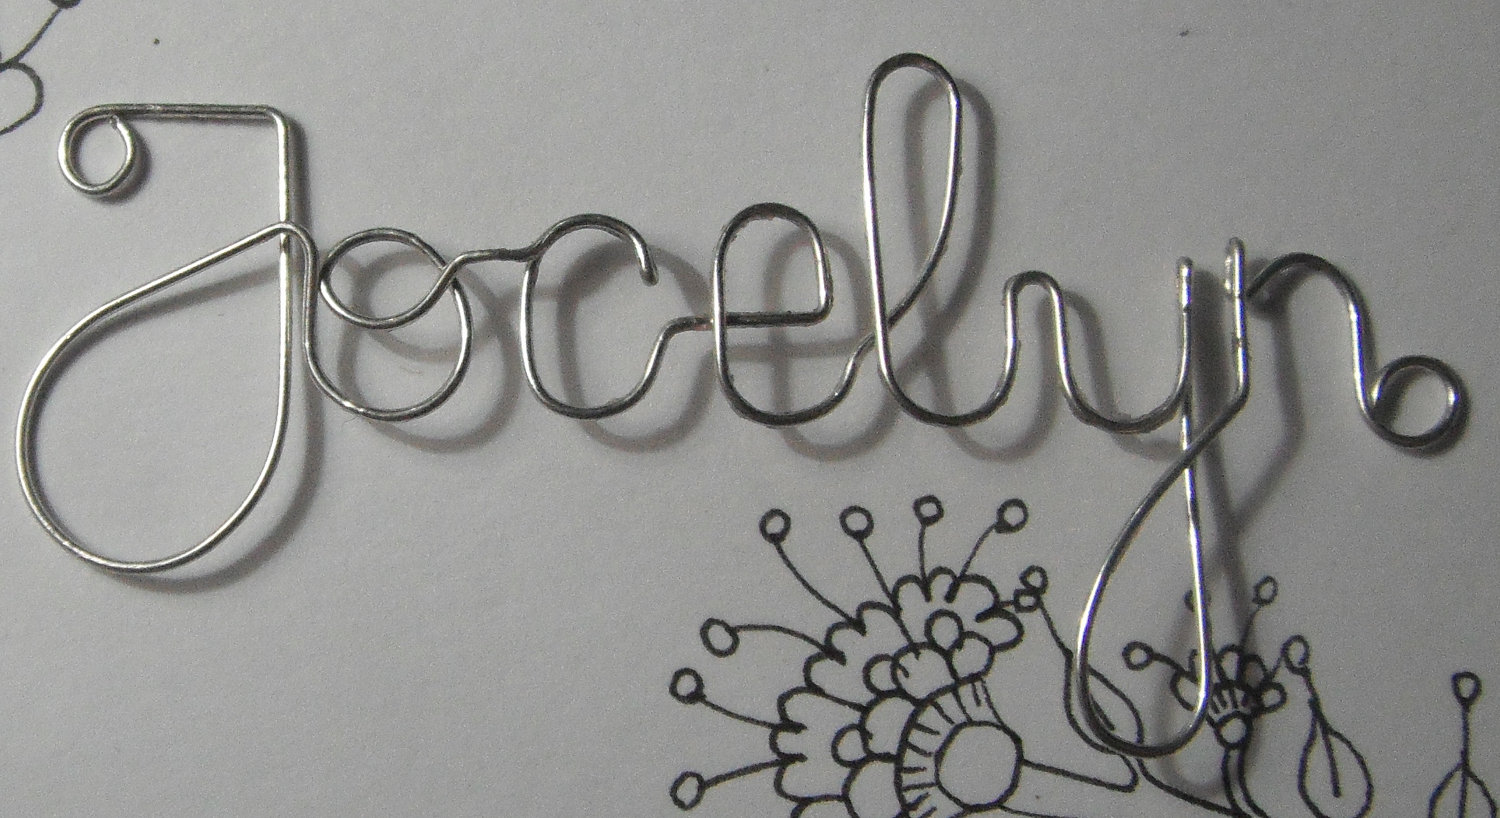 silver plated reusable wire tag of the name Jocelyn